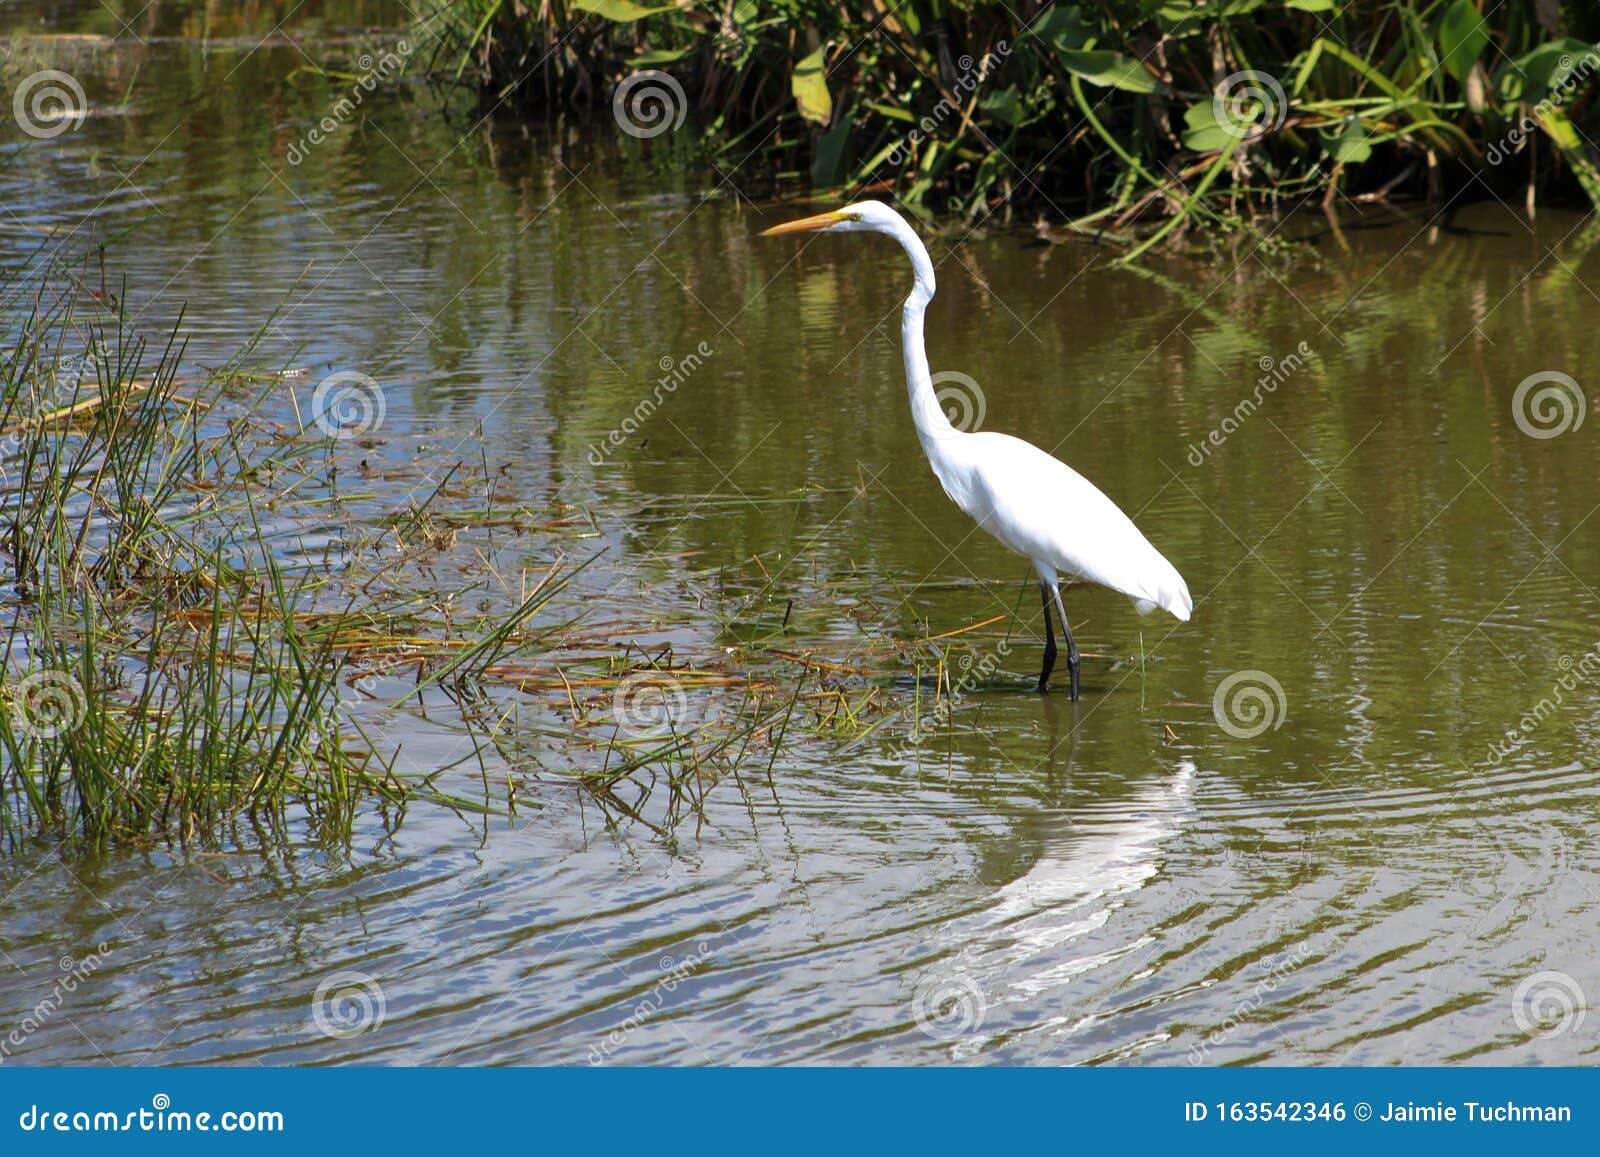 Big White Bird In The Swamp Of Florida Stock Photo Image Of Nature